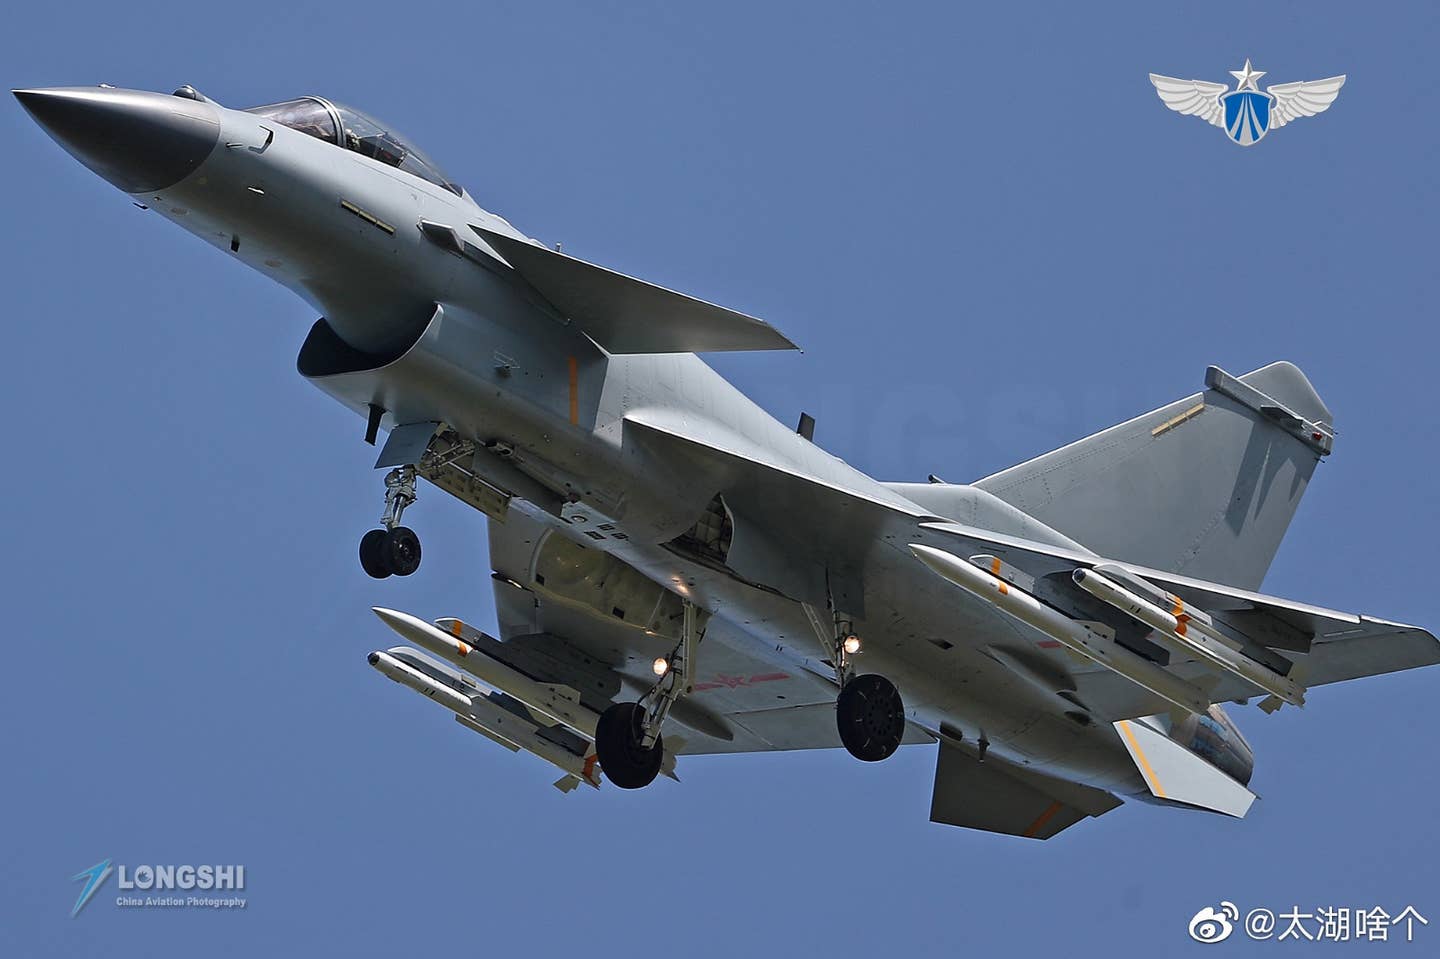 The latest air-to-air load-out for the J-10 (like this J-10C) comprises PL-15 (inboard) and PL-10 (outboard) AAMs. <em>via Chinese internet</em>